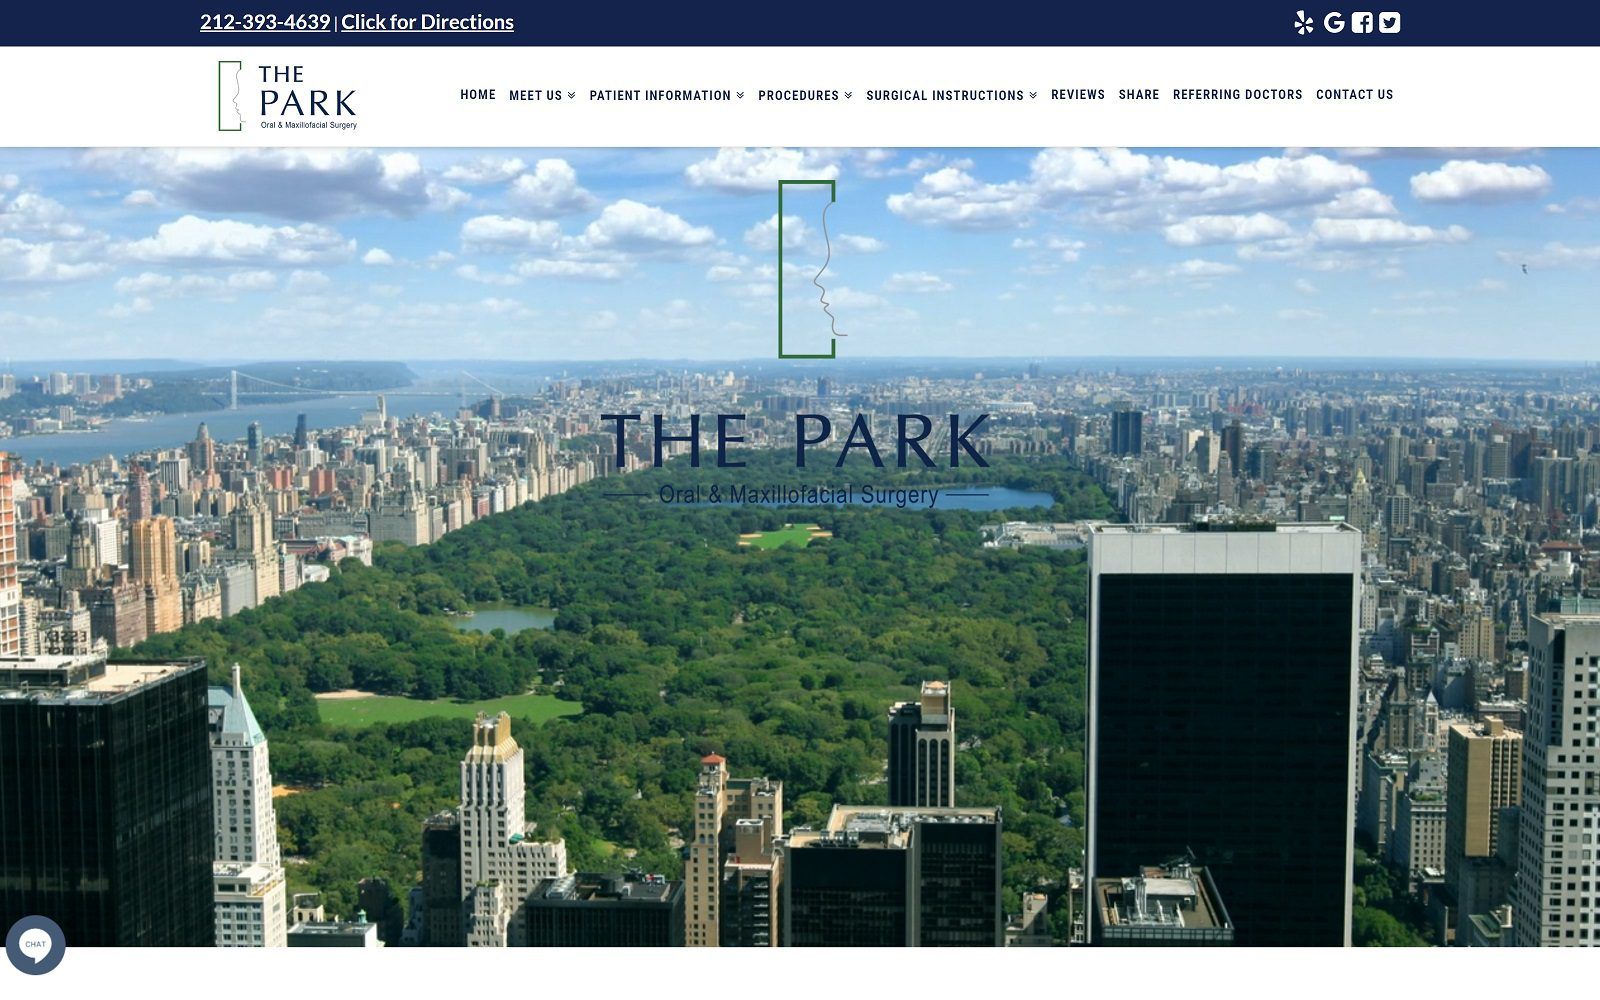 The screenshot of the park oral and maxillofacial surgery: y. Paul han, dds website